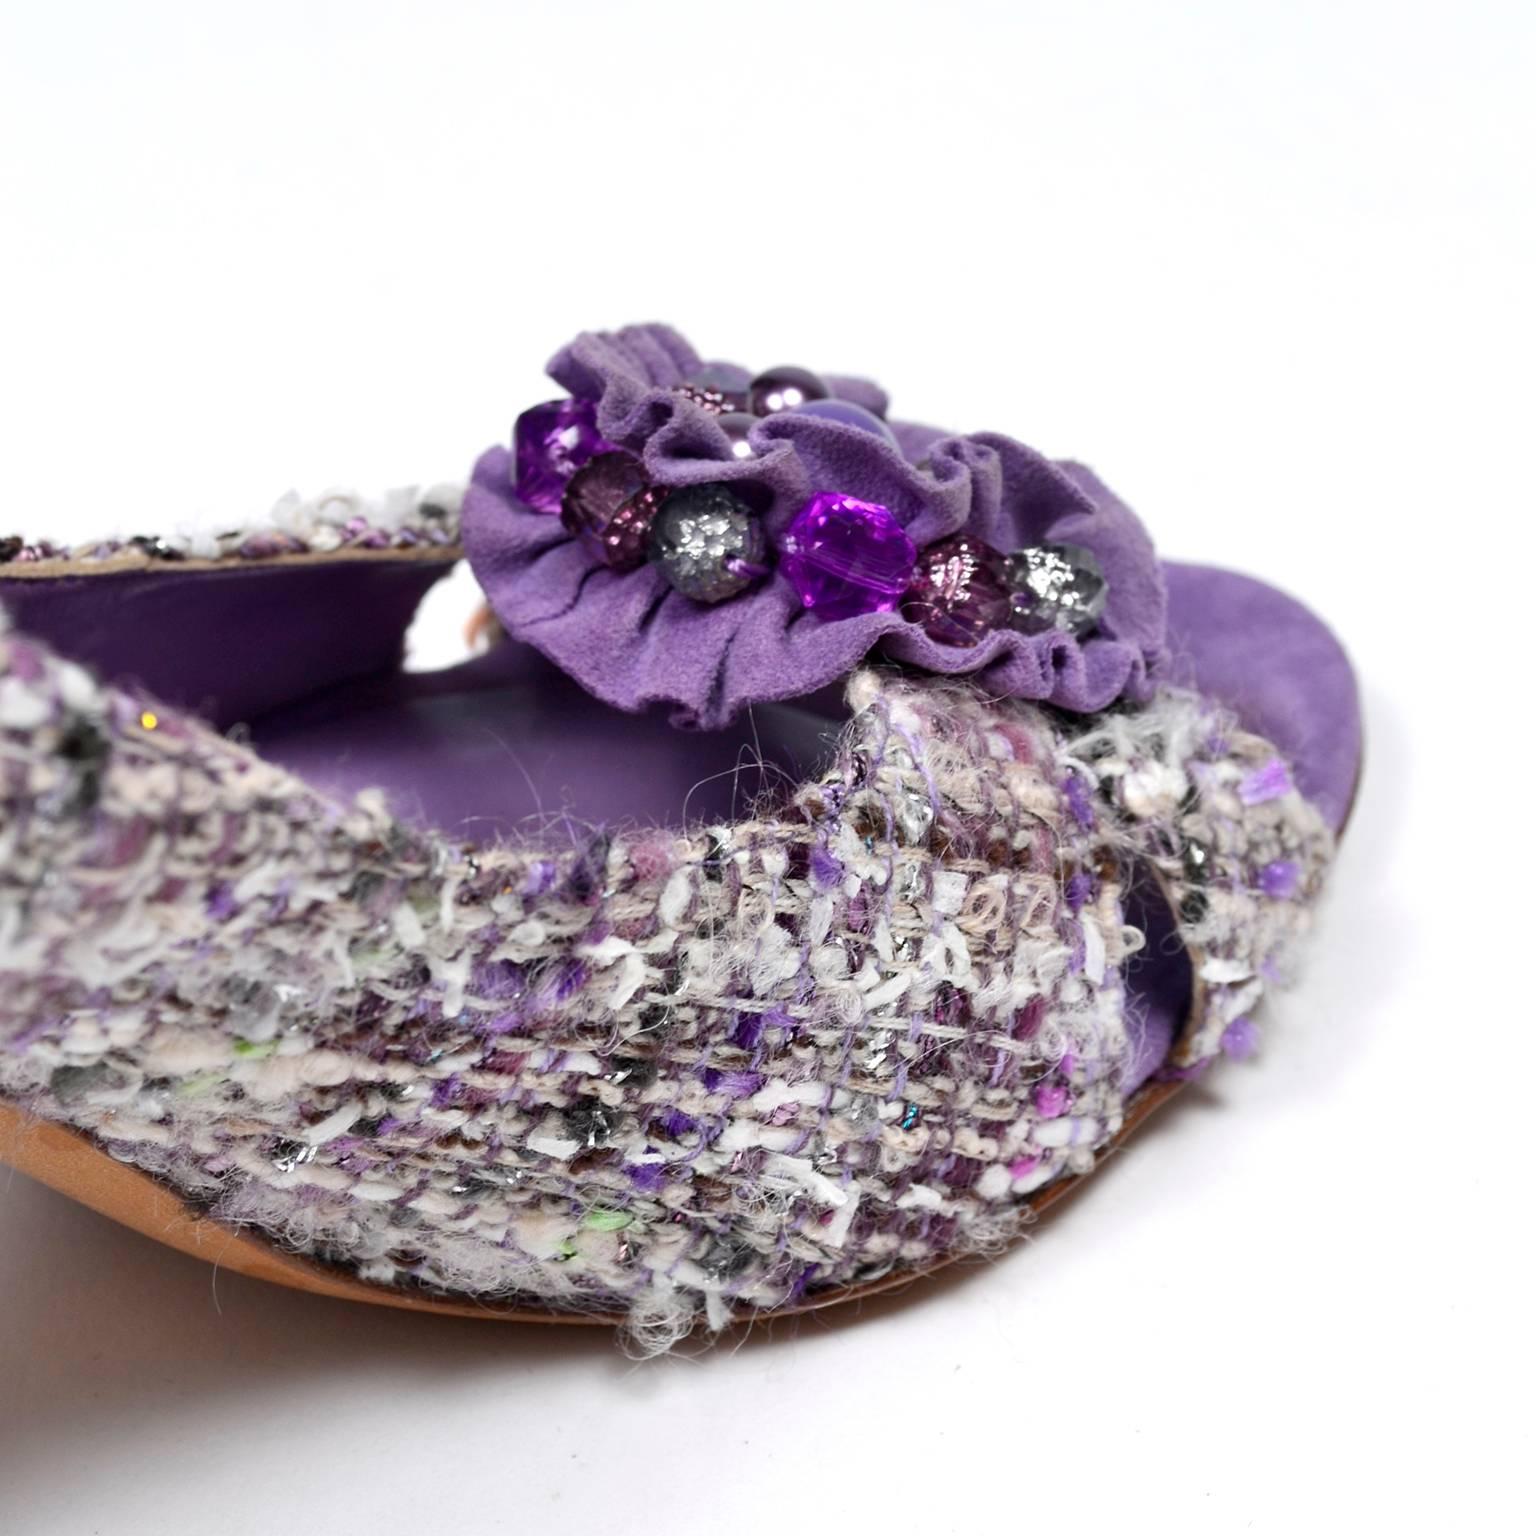 Vintage Open Toe Moschino Purple Tweed Shoes with Beaded Bows Rosettes Size 37 In Good Condition For Sale In Portland, OR